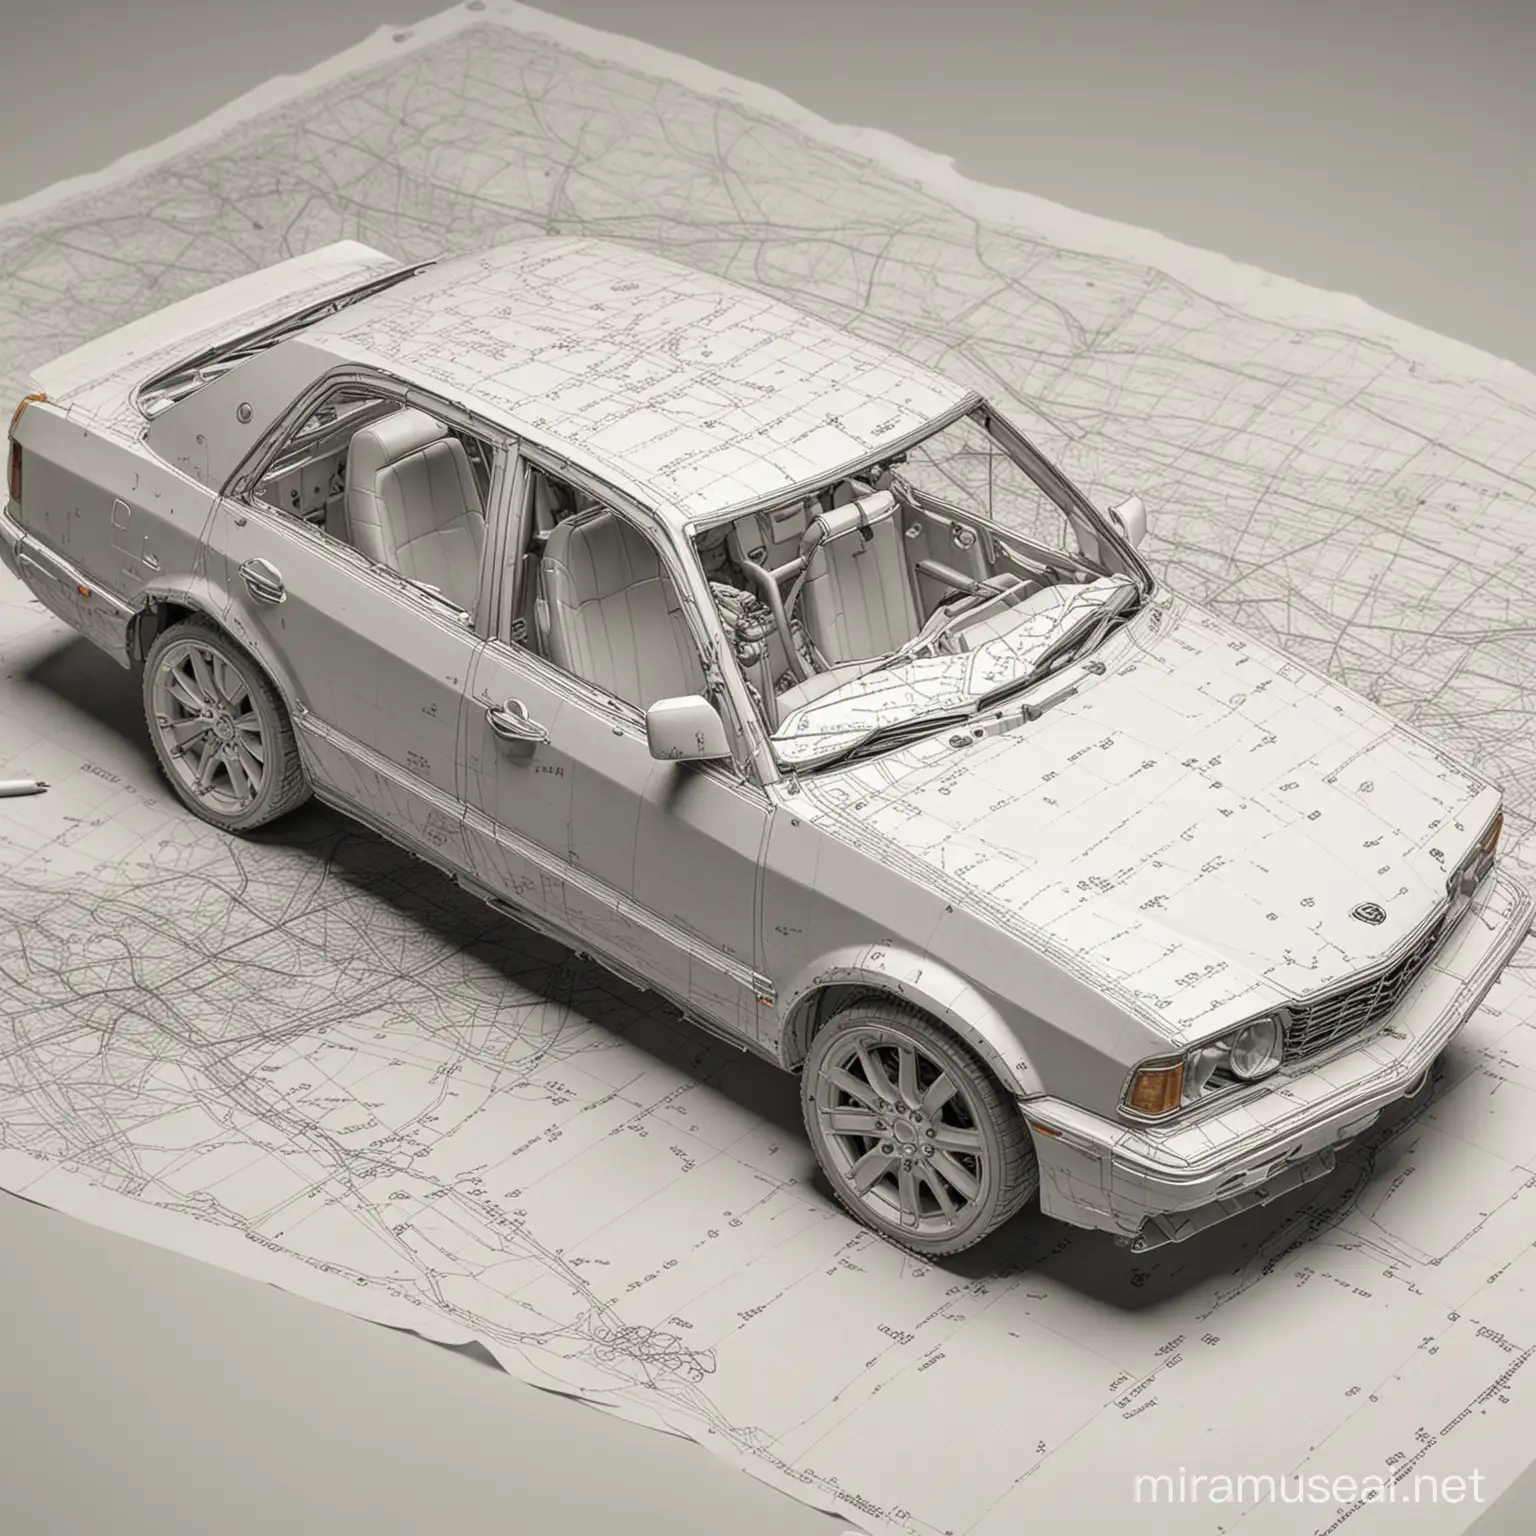 Detailed Blueprint of a Sedan Car with Fully Engineered Components on Paper